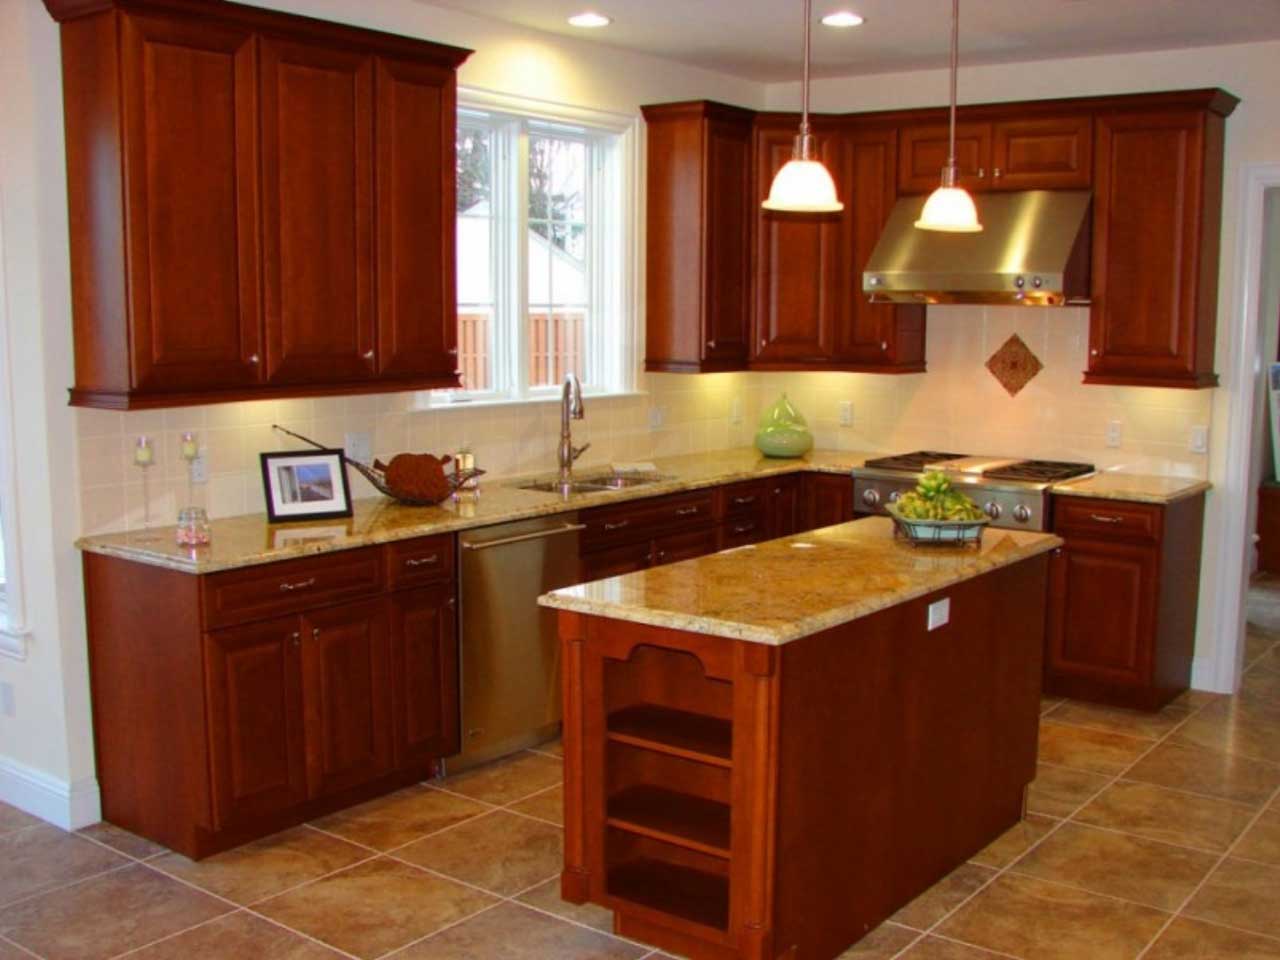 Kitchen Remodel Small Classic Kitchen Remodel Ideas For Small Open Kitchen Idea Designs With Traditional Wooden Cabinets Idea And Rustic Brown Textured Ceramic Flooring Idea Also Beautiful Yellow Granite Countertop Kitchen Most Popular Kitchen Layout To Emulate Your Own After